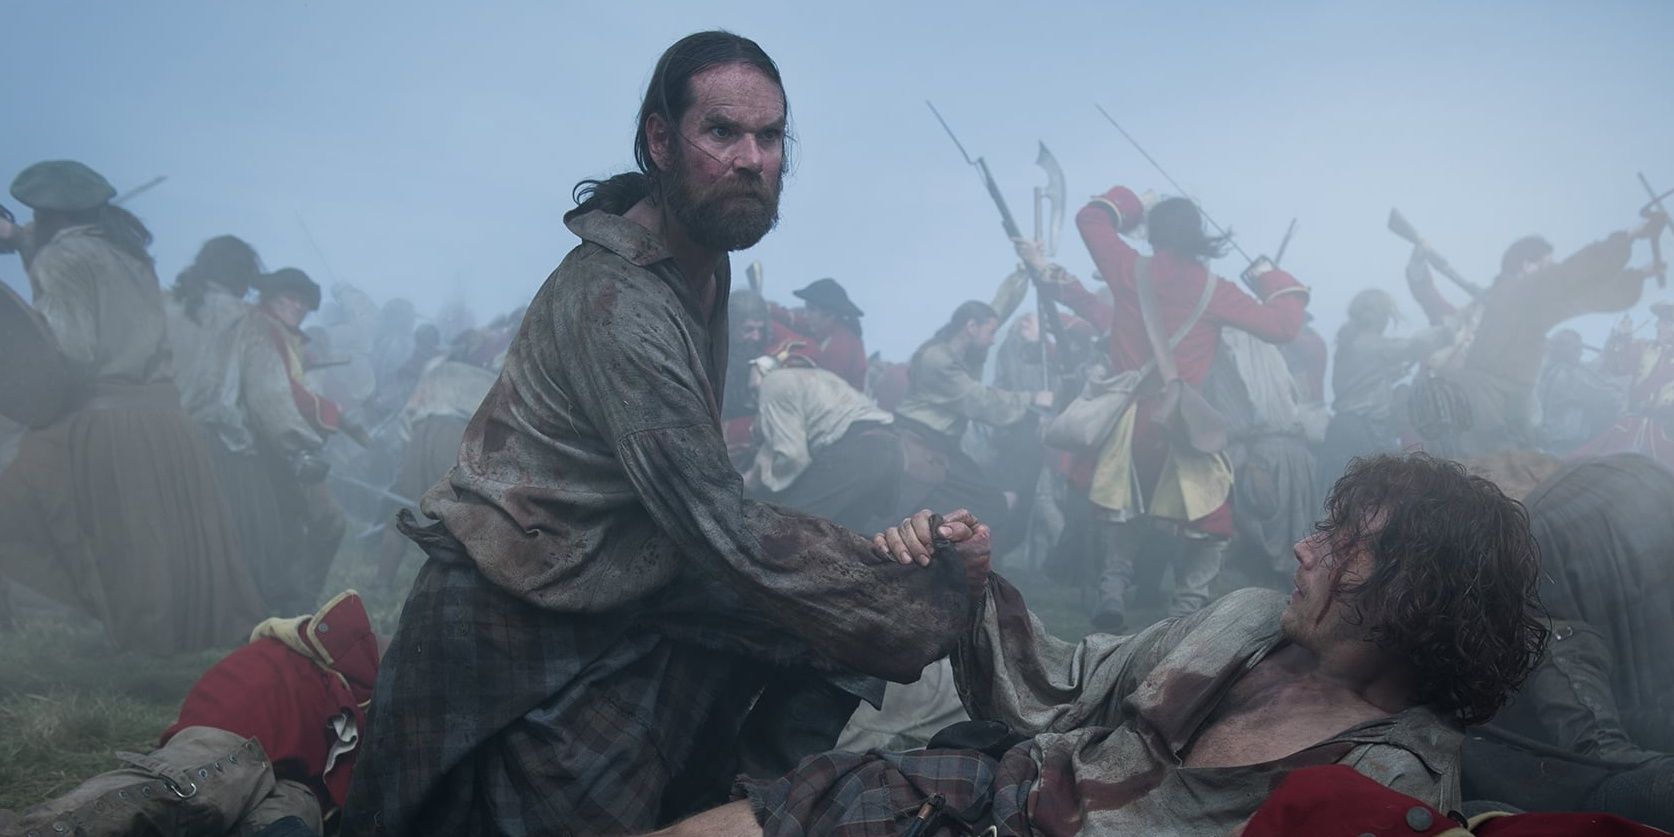 Murtagh fighting at the Battle of Culloden.